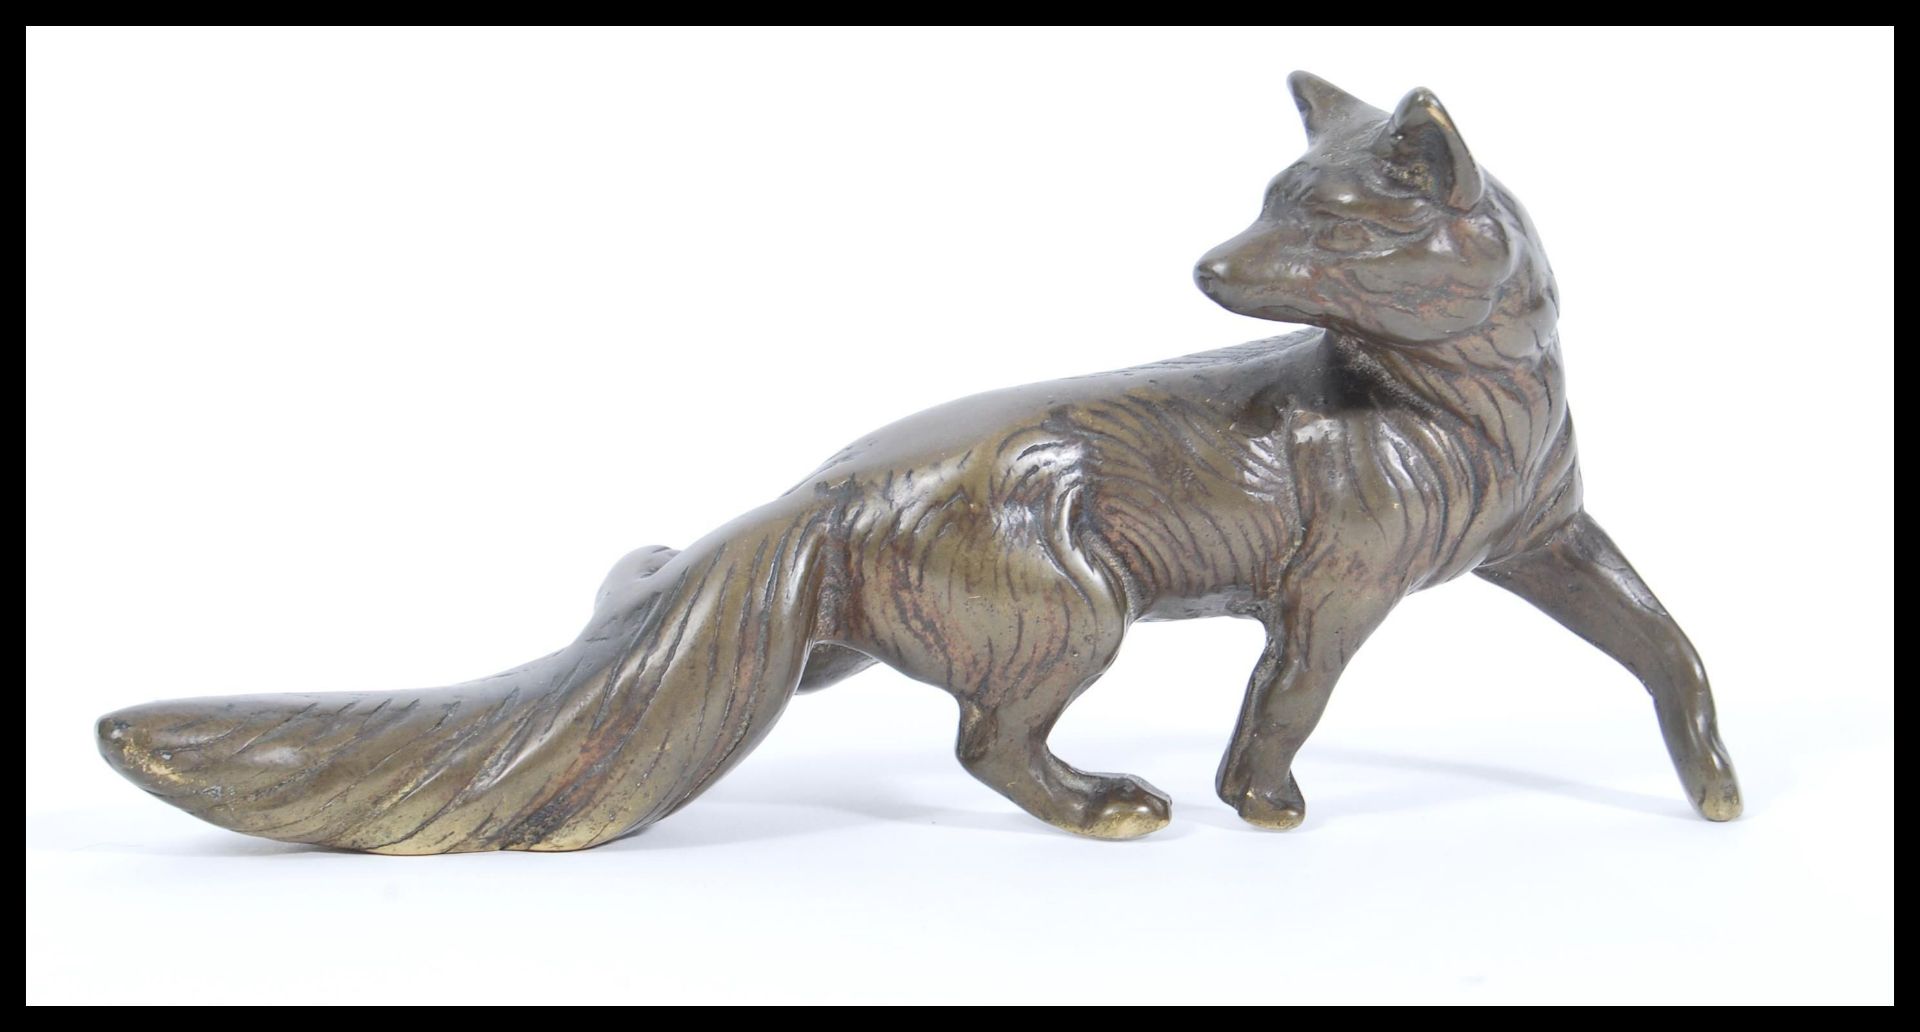 A 20th Century cast bronze figurine in the form of a stalking fox looking over its shoulder with